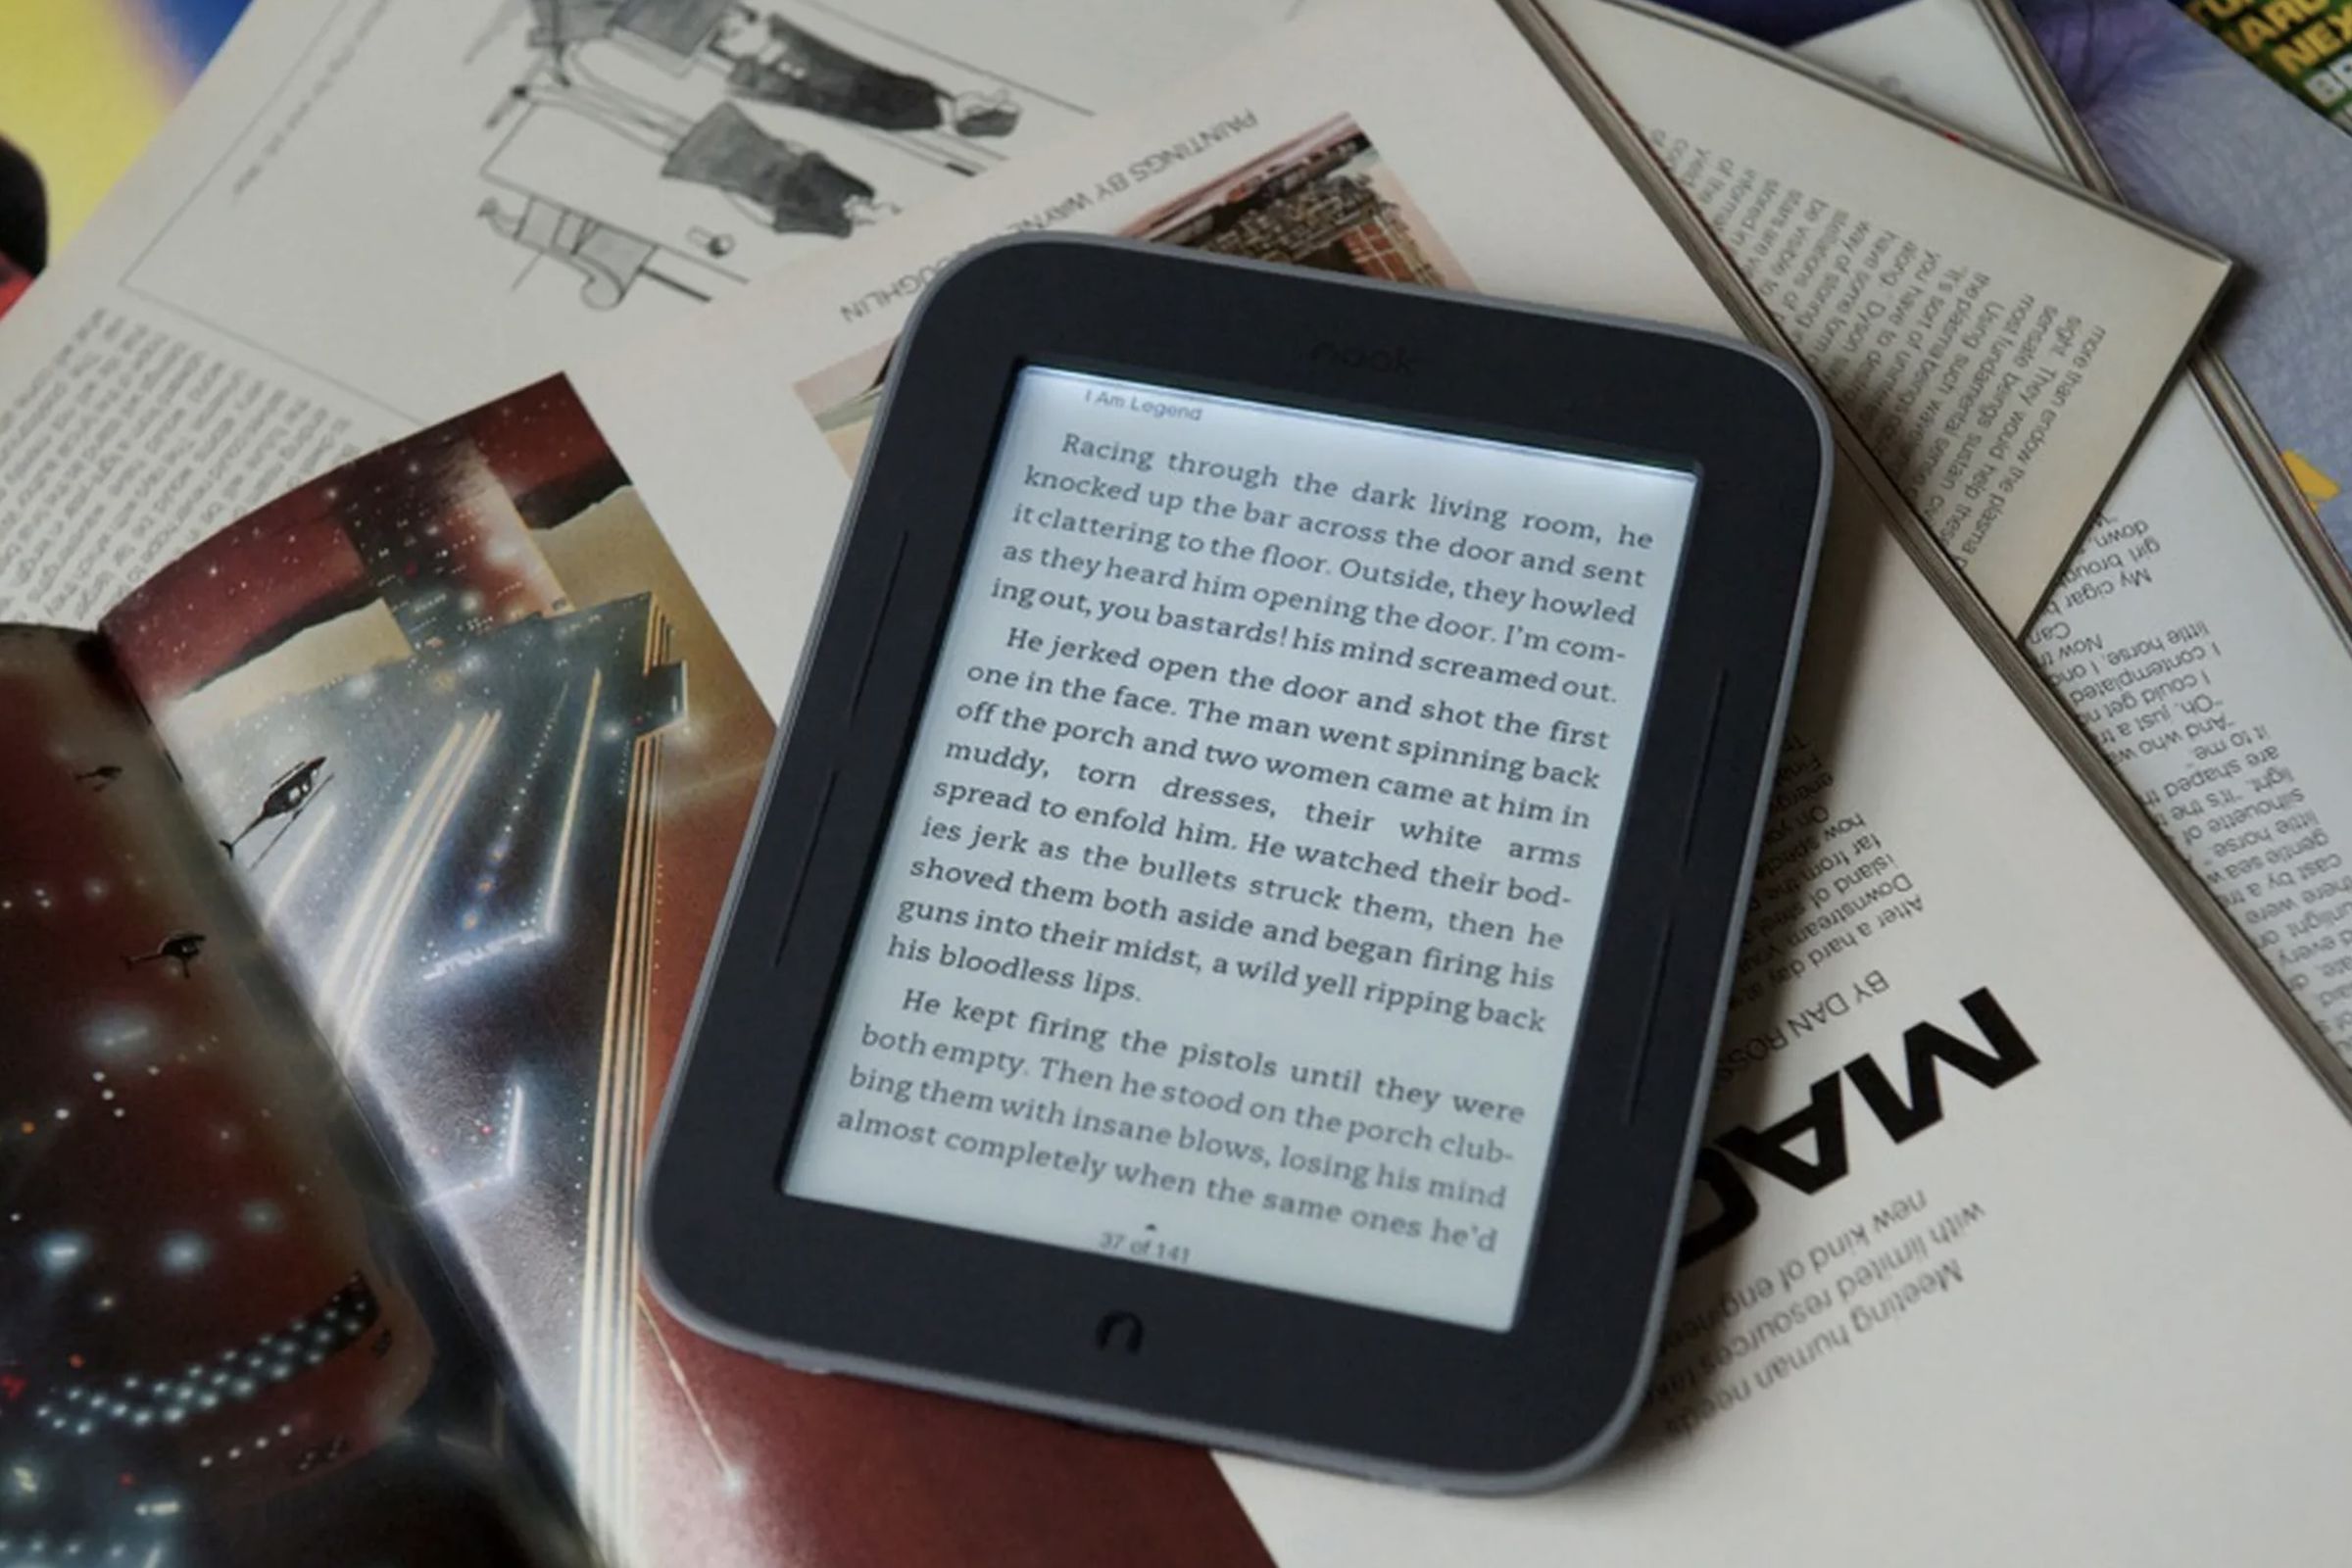 Old nook e-reader with a book open